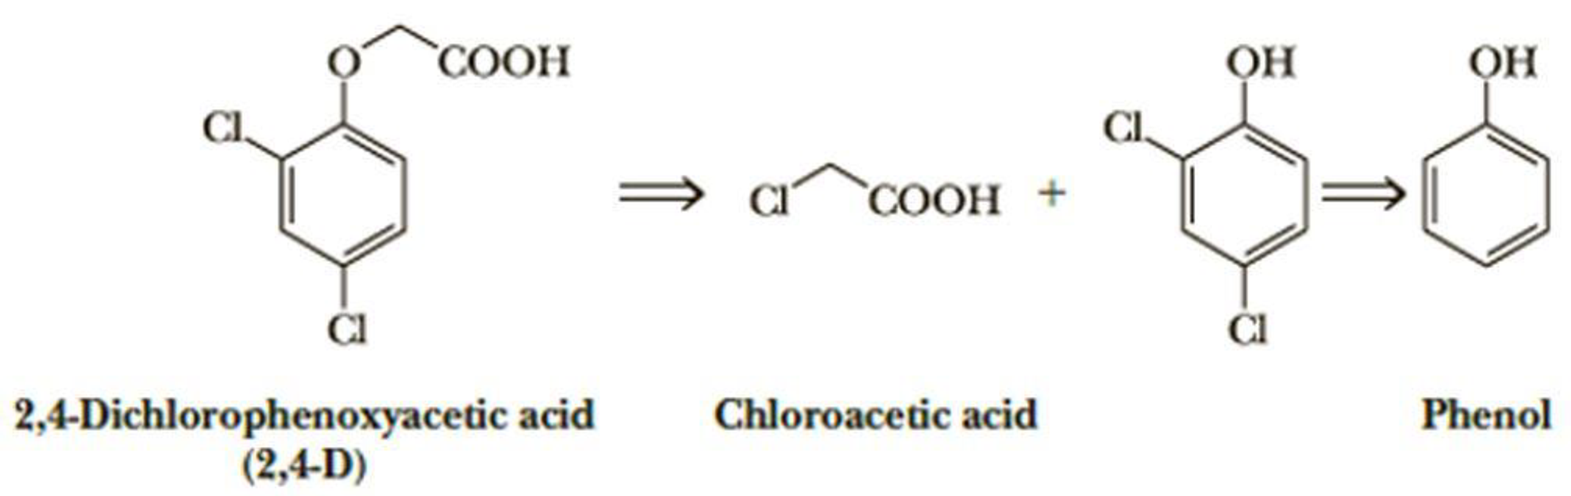 Chapter 22, Problem 22.38P, The first widely used herbicide for the control of weeds was 2,4-dichlorophenoxyacetic acid (2,4-D). 